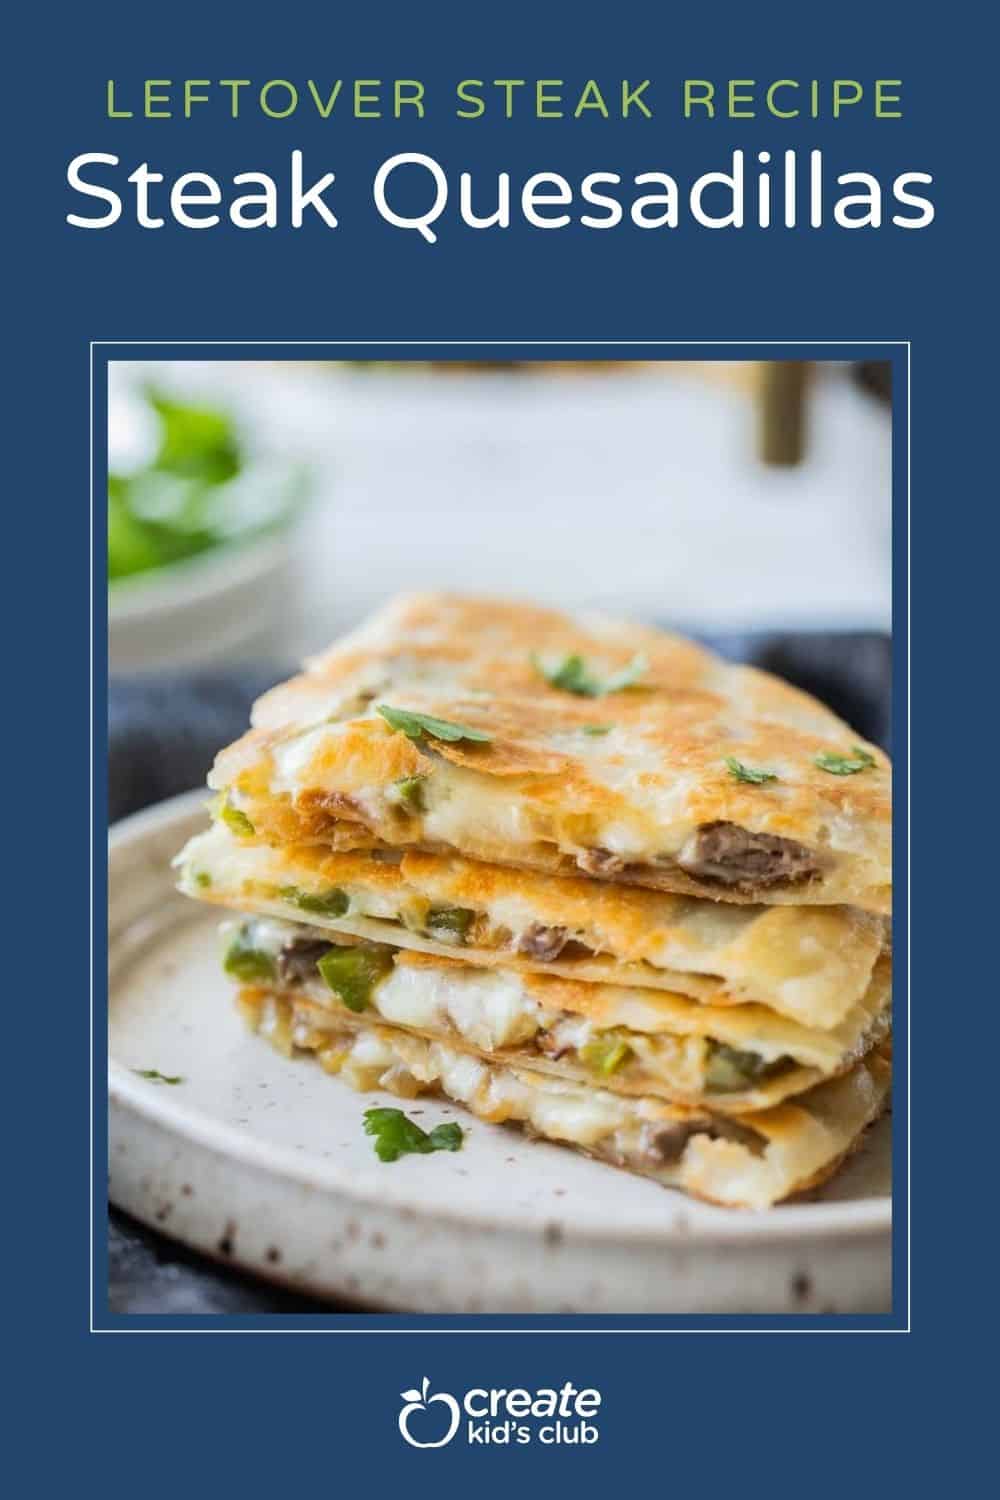 steak quesadilla wedges stacked on a plate